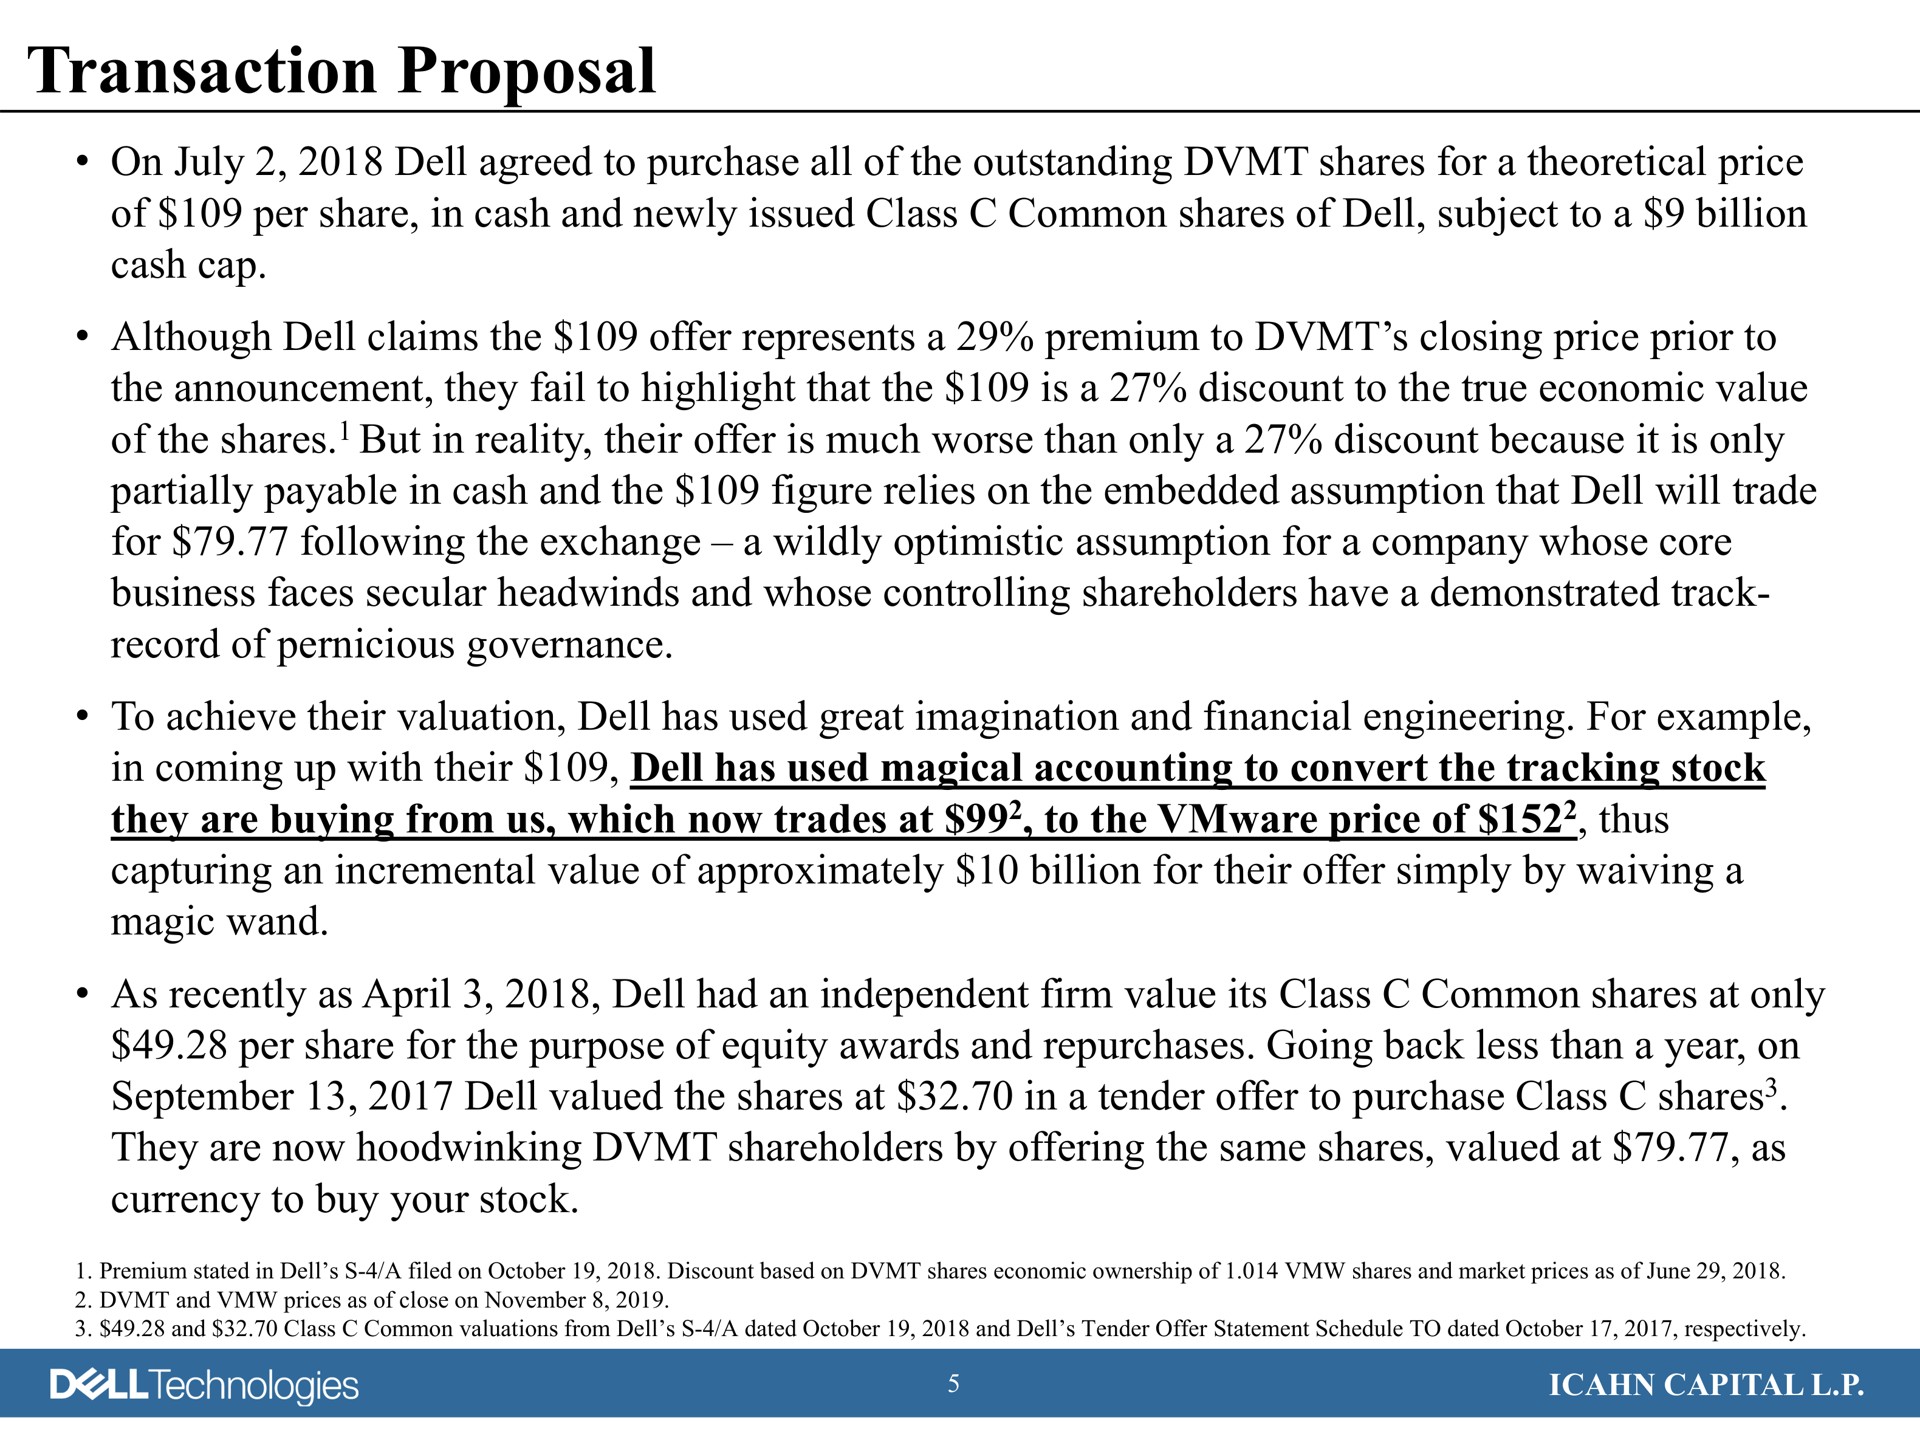 transaction proposal on dell agreed to purchase all of the outstanding shares for a theoretical price of per share in cash and newly issued class common shares of dell subject to a billion cash cap although dell claims the offer represents a premium to closing price prior to the announcement they fail to highlight that the is a discount to the true economic value of the shares but in reality their offer is much worse than only a discount because it is only partially payable in cash and the figure relies on the embedded assumption that dell will trade for following the exchange a wildly optimistic assumption for a company whose core business faces secular and whose controlling shareholders have a demonstrated track record of pernicious governance to achieve their valuation dell has used great imagination and financial engineering for example in coming up with their dell has used magical accounting to convert the tracking stock they are buying from us which now trades at to the price of thus capturing an incremental value of approximately billion for their offer simply by waiving a magic wand as recently as dell had an independent firm value its class common shares at only per share for the purpose of equity awards and repurchases going back less than a year on dell valued the shares at in a tender offer to purchase class shares they are now hoodwinking shareholders by offering the same shares valued at as currency to buy your stock technologies capital | Icahn Enterprises